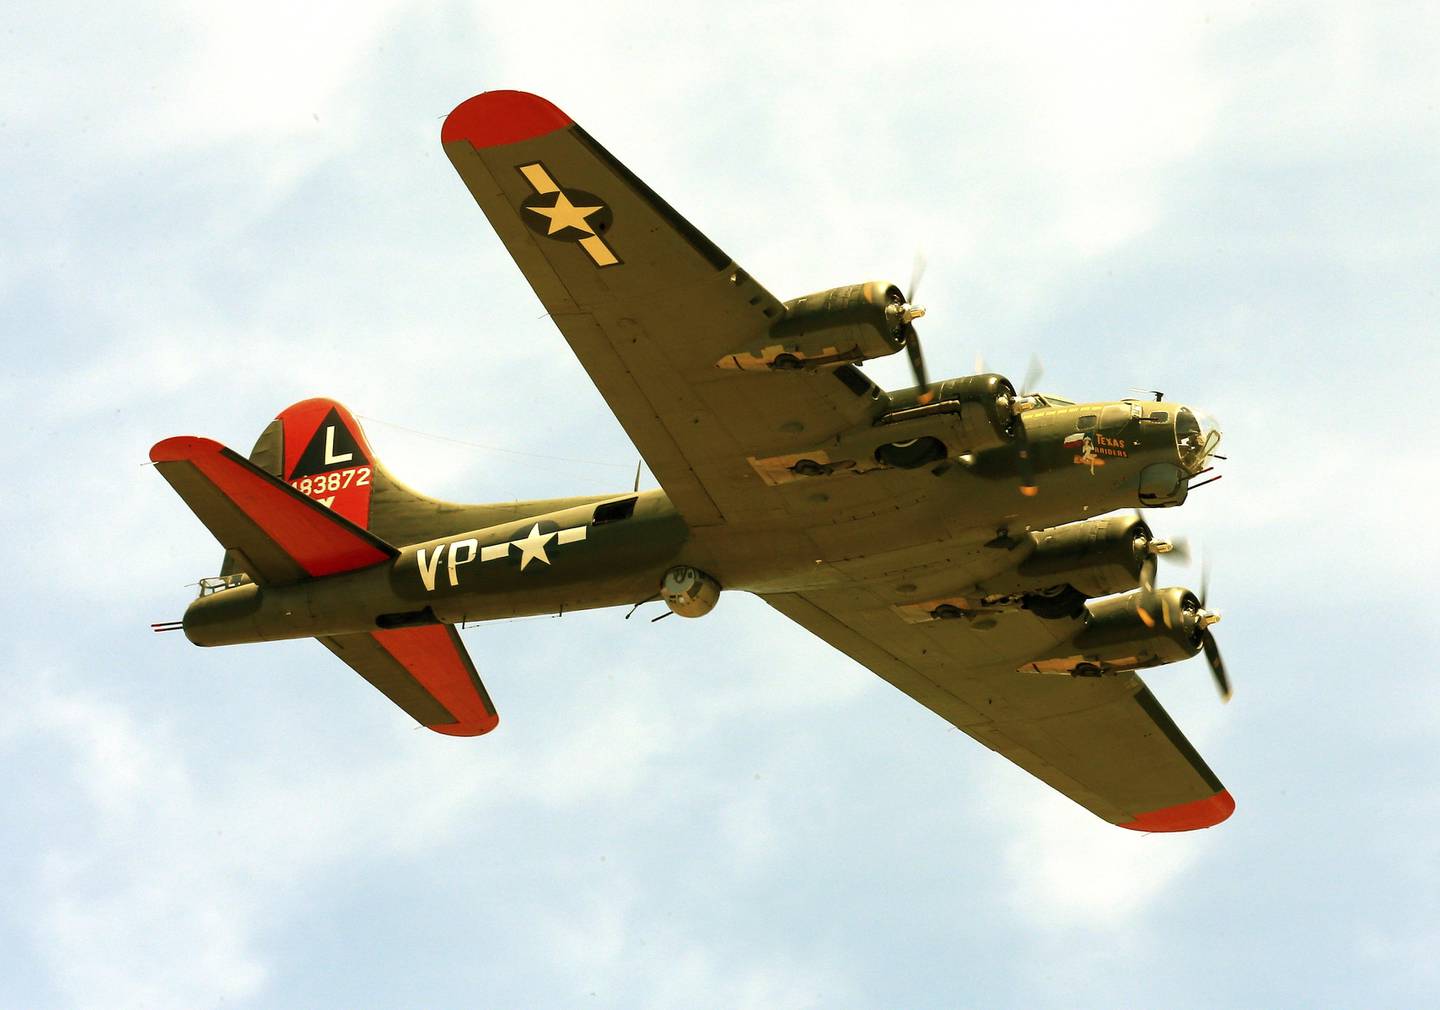 The historic military B-17 aircraft named "Texas Raiders" flies over Barksdale A.F.B., La., on May 8, 2021.